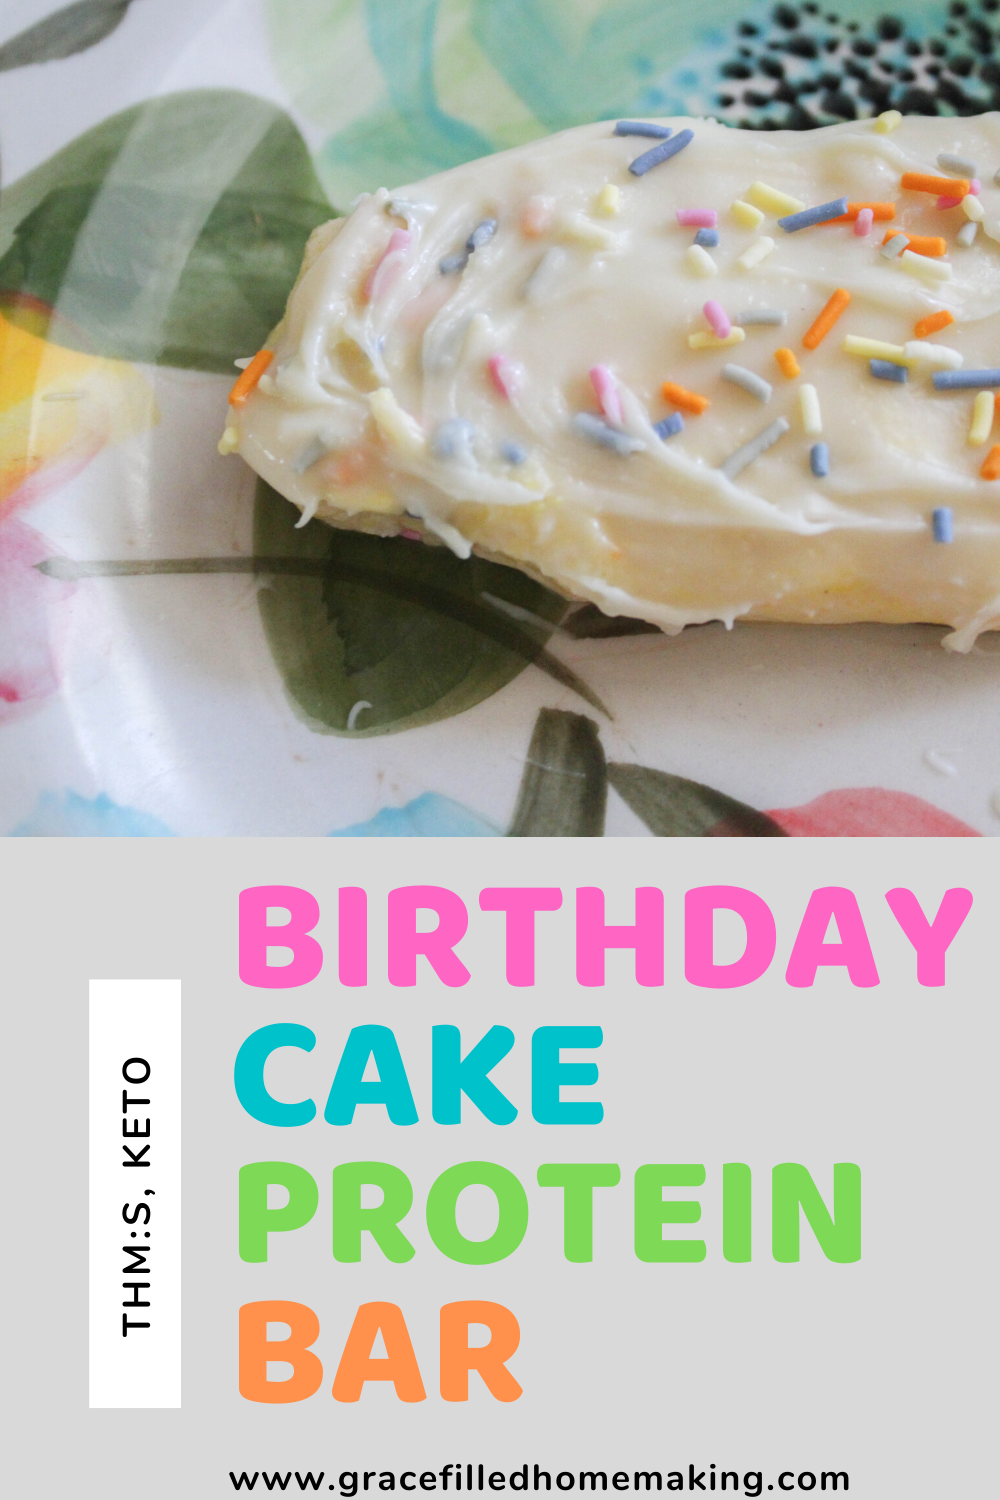 My Birthday Cake Protein Bar adds a bit of sparkle to any day! Powerhouse ingredients fuel your body, while indulging your taste buds. This is a THM:S!